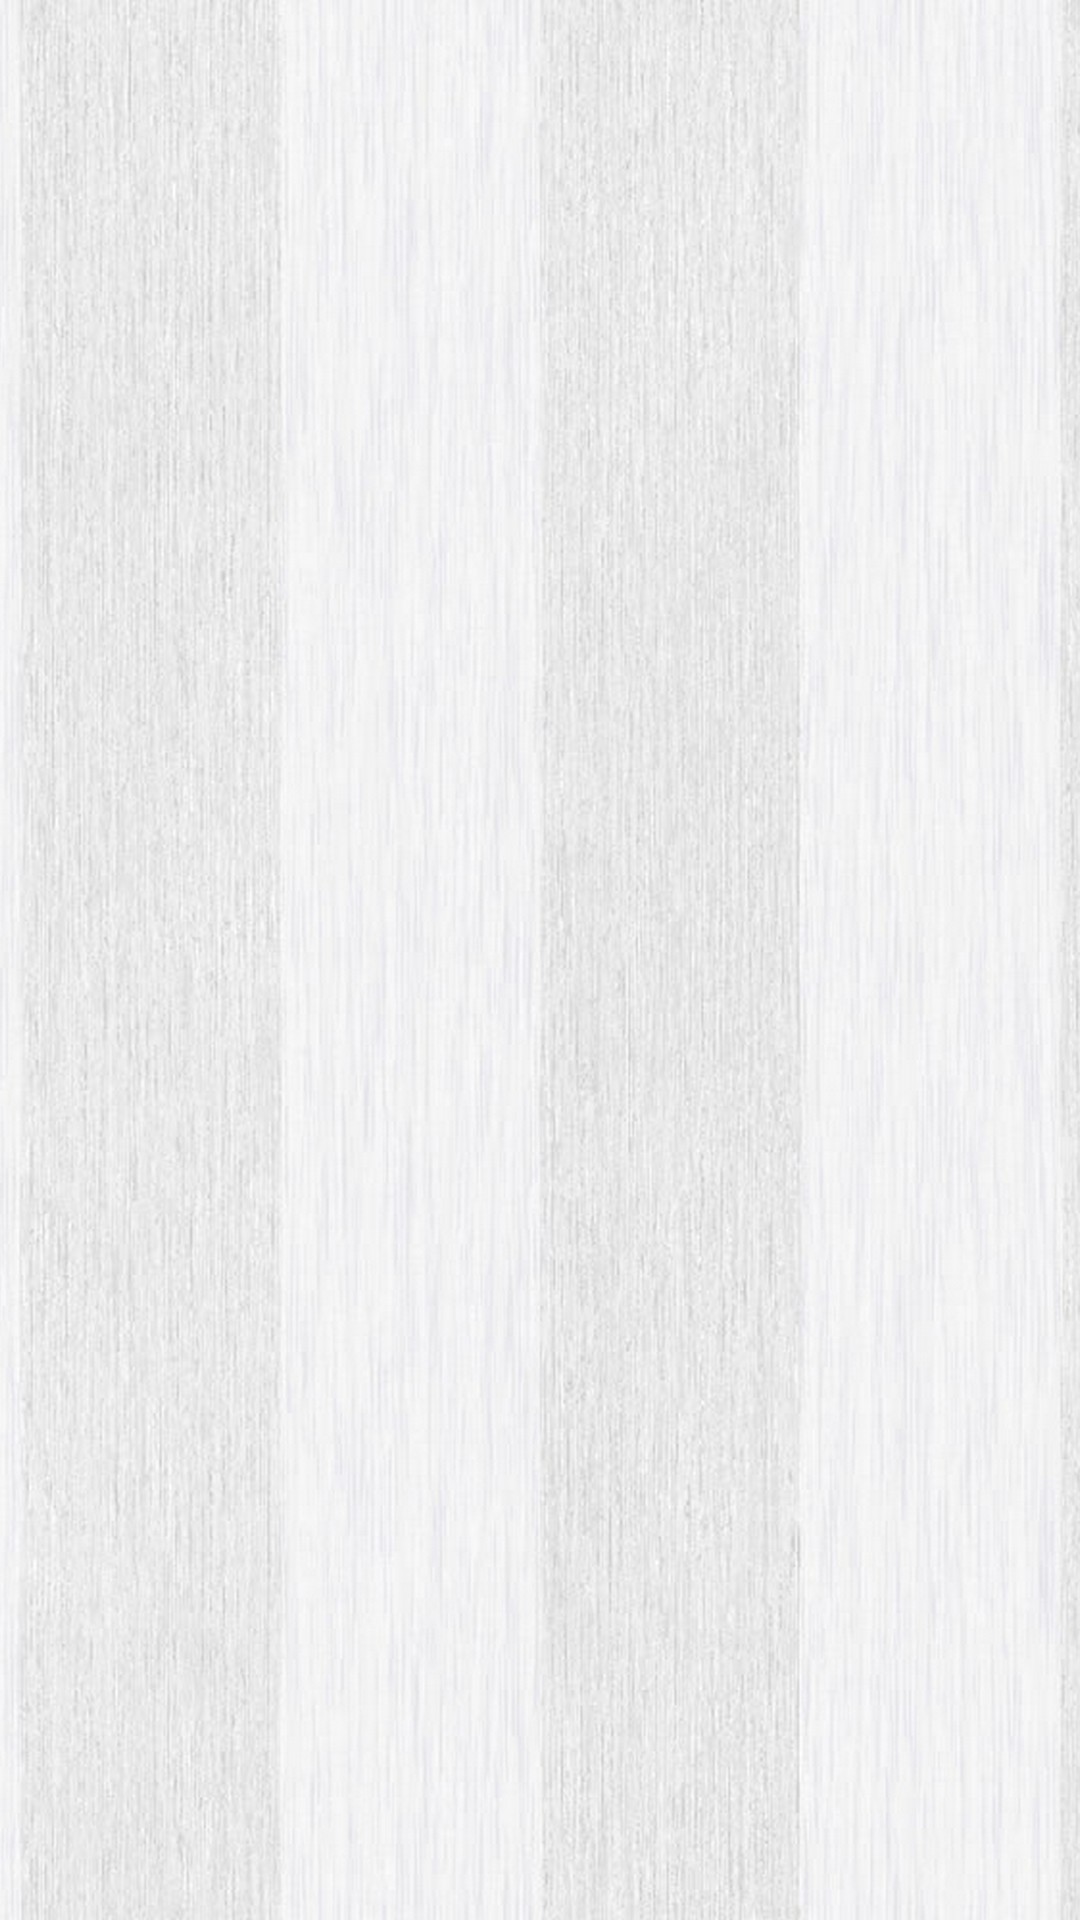 Grey and Silver Wallpaper For iPhone resolution 1080x1920